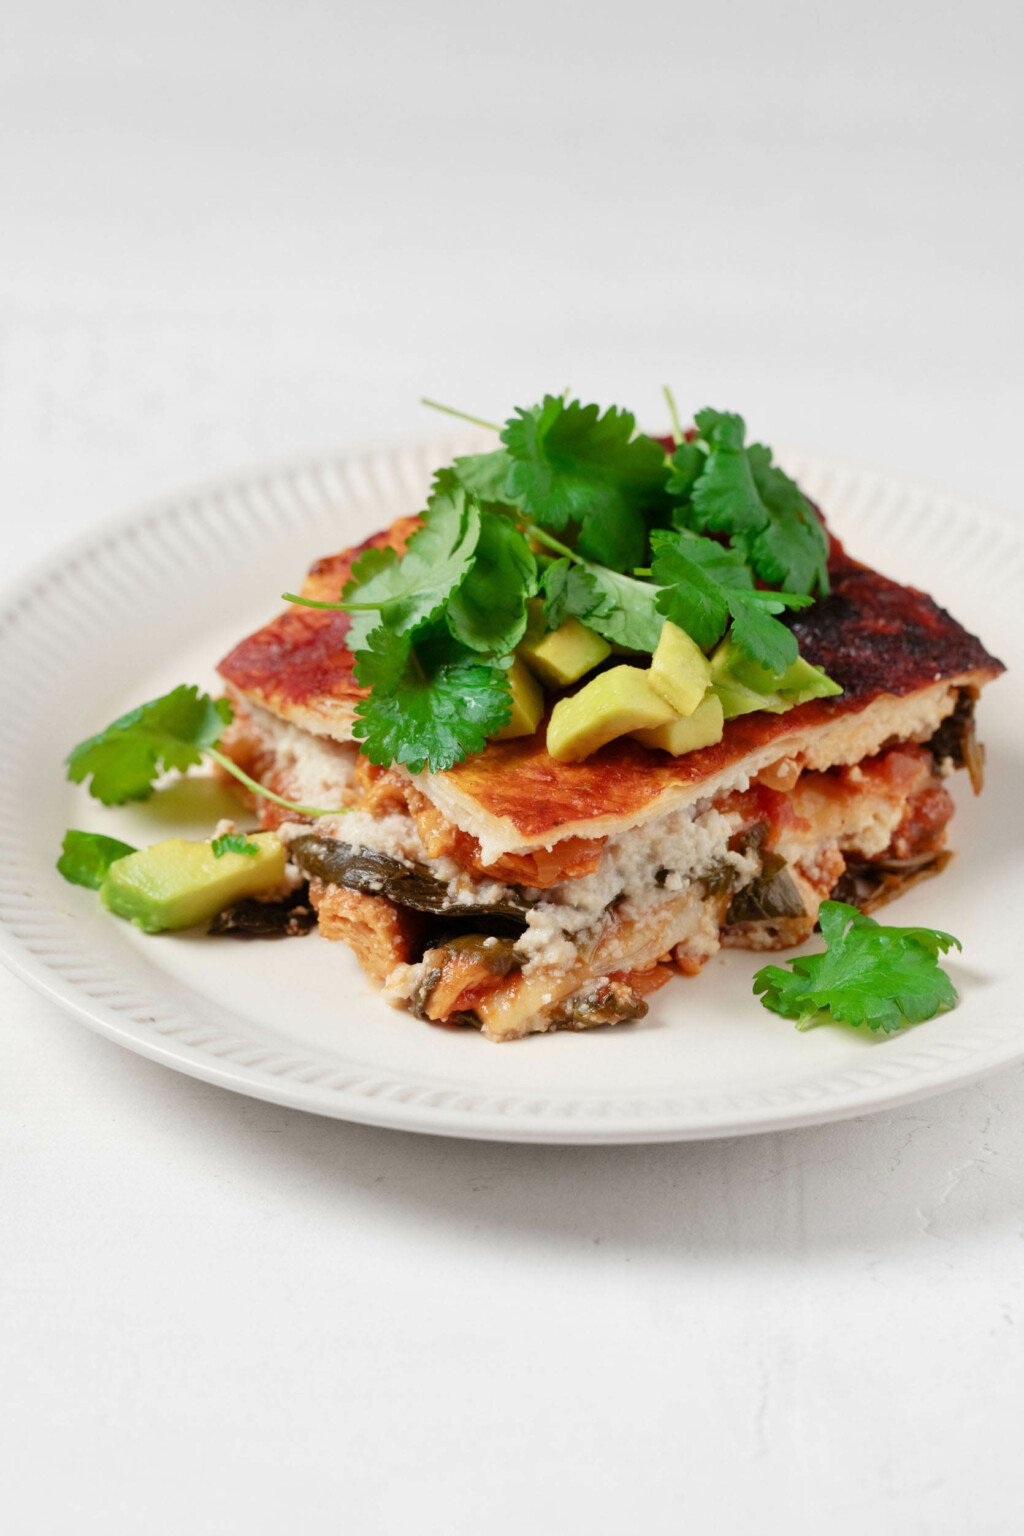 An angled image of vegan enchilada casserole, resting on a white plate.